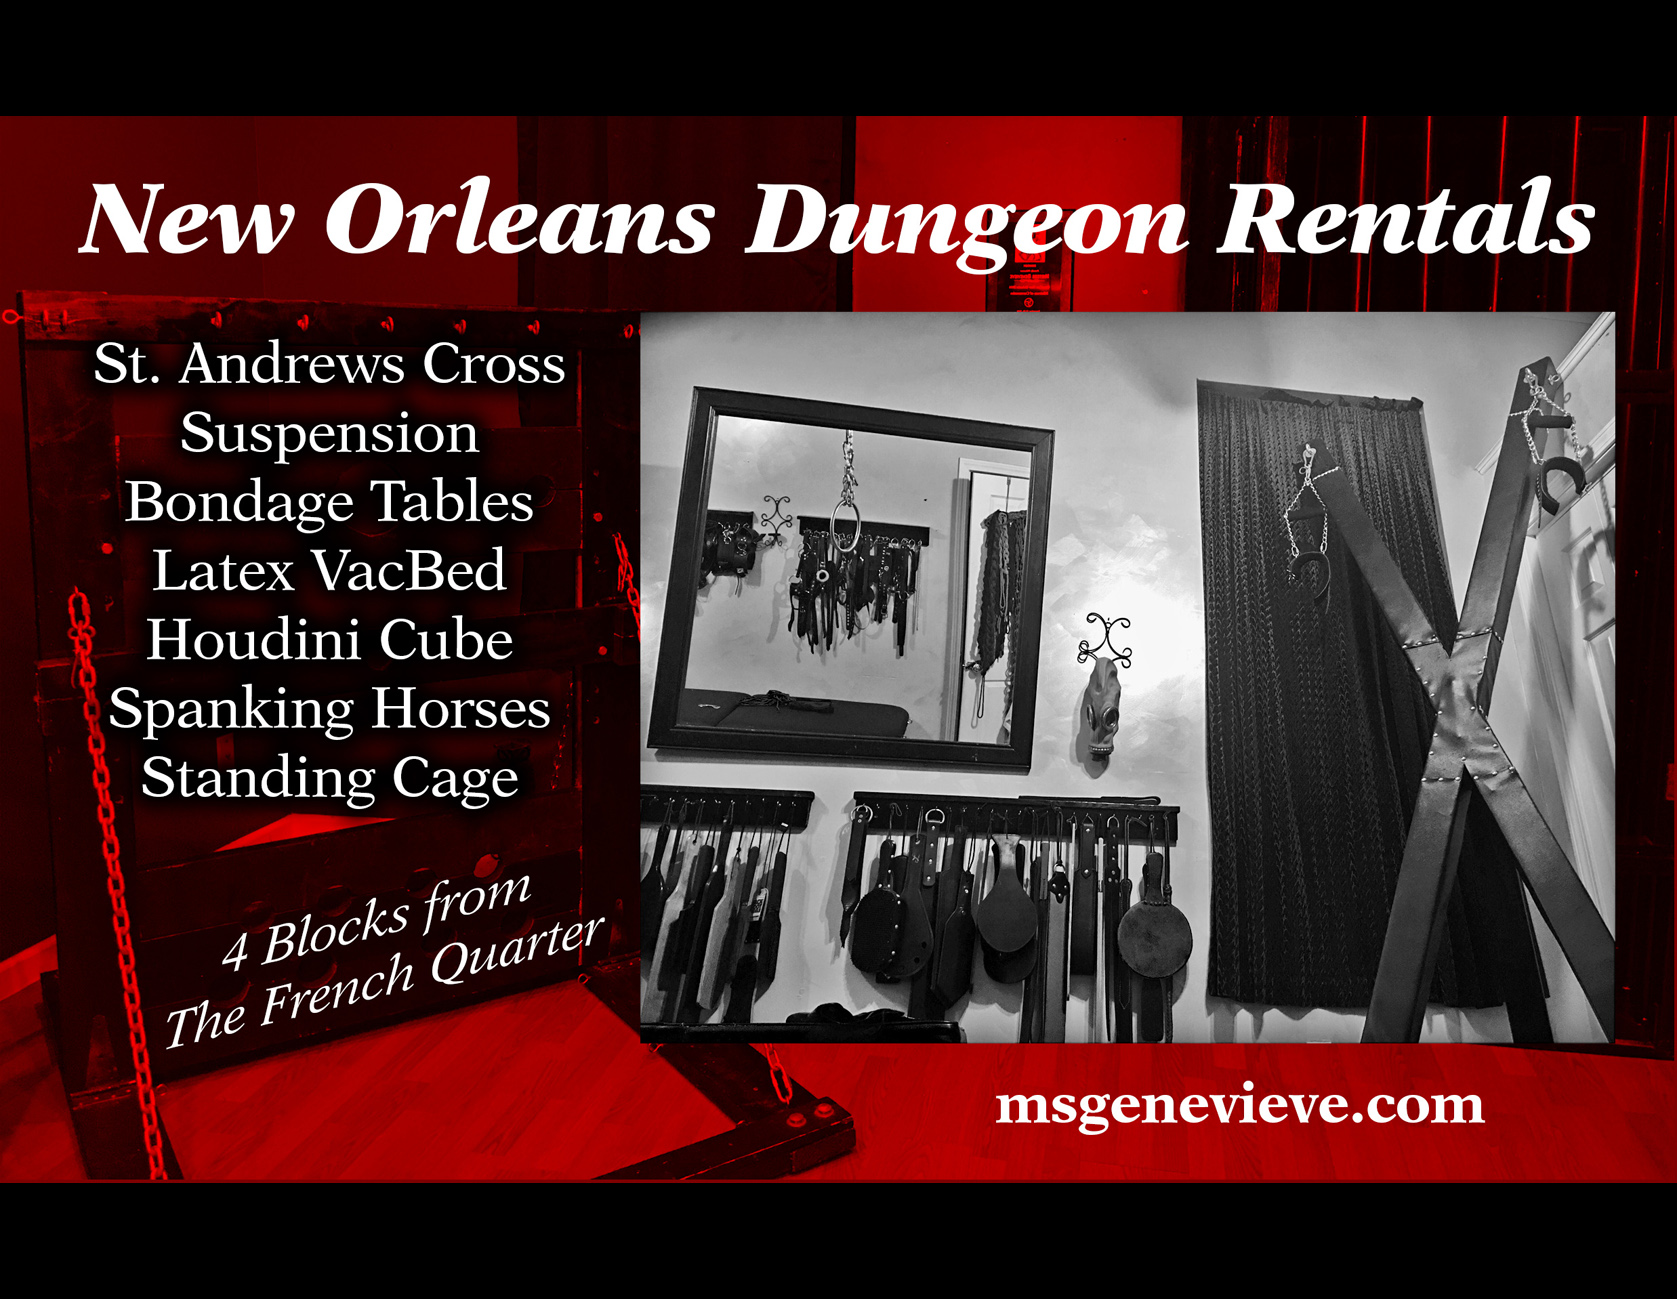 ABOUT ME: I am Mistress Genevieve New Orleans based Pro-Domme (Dominatrix)....